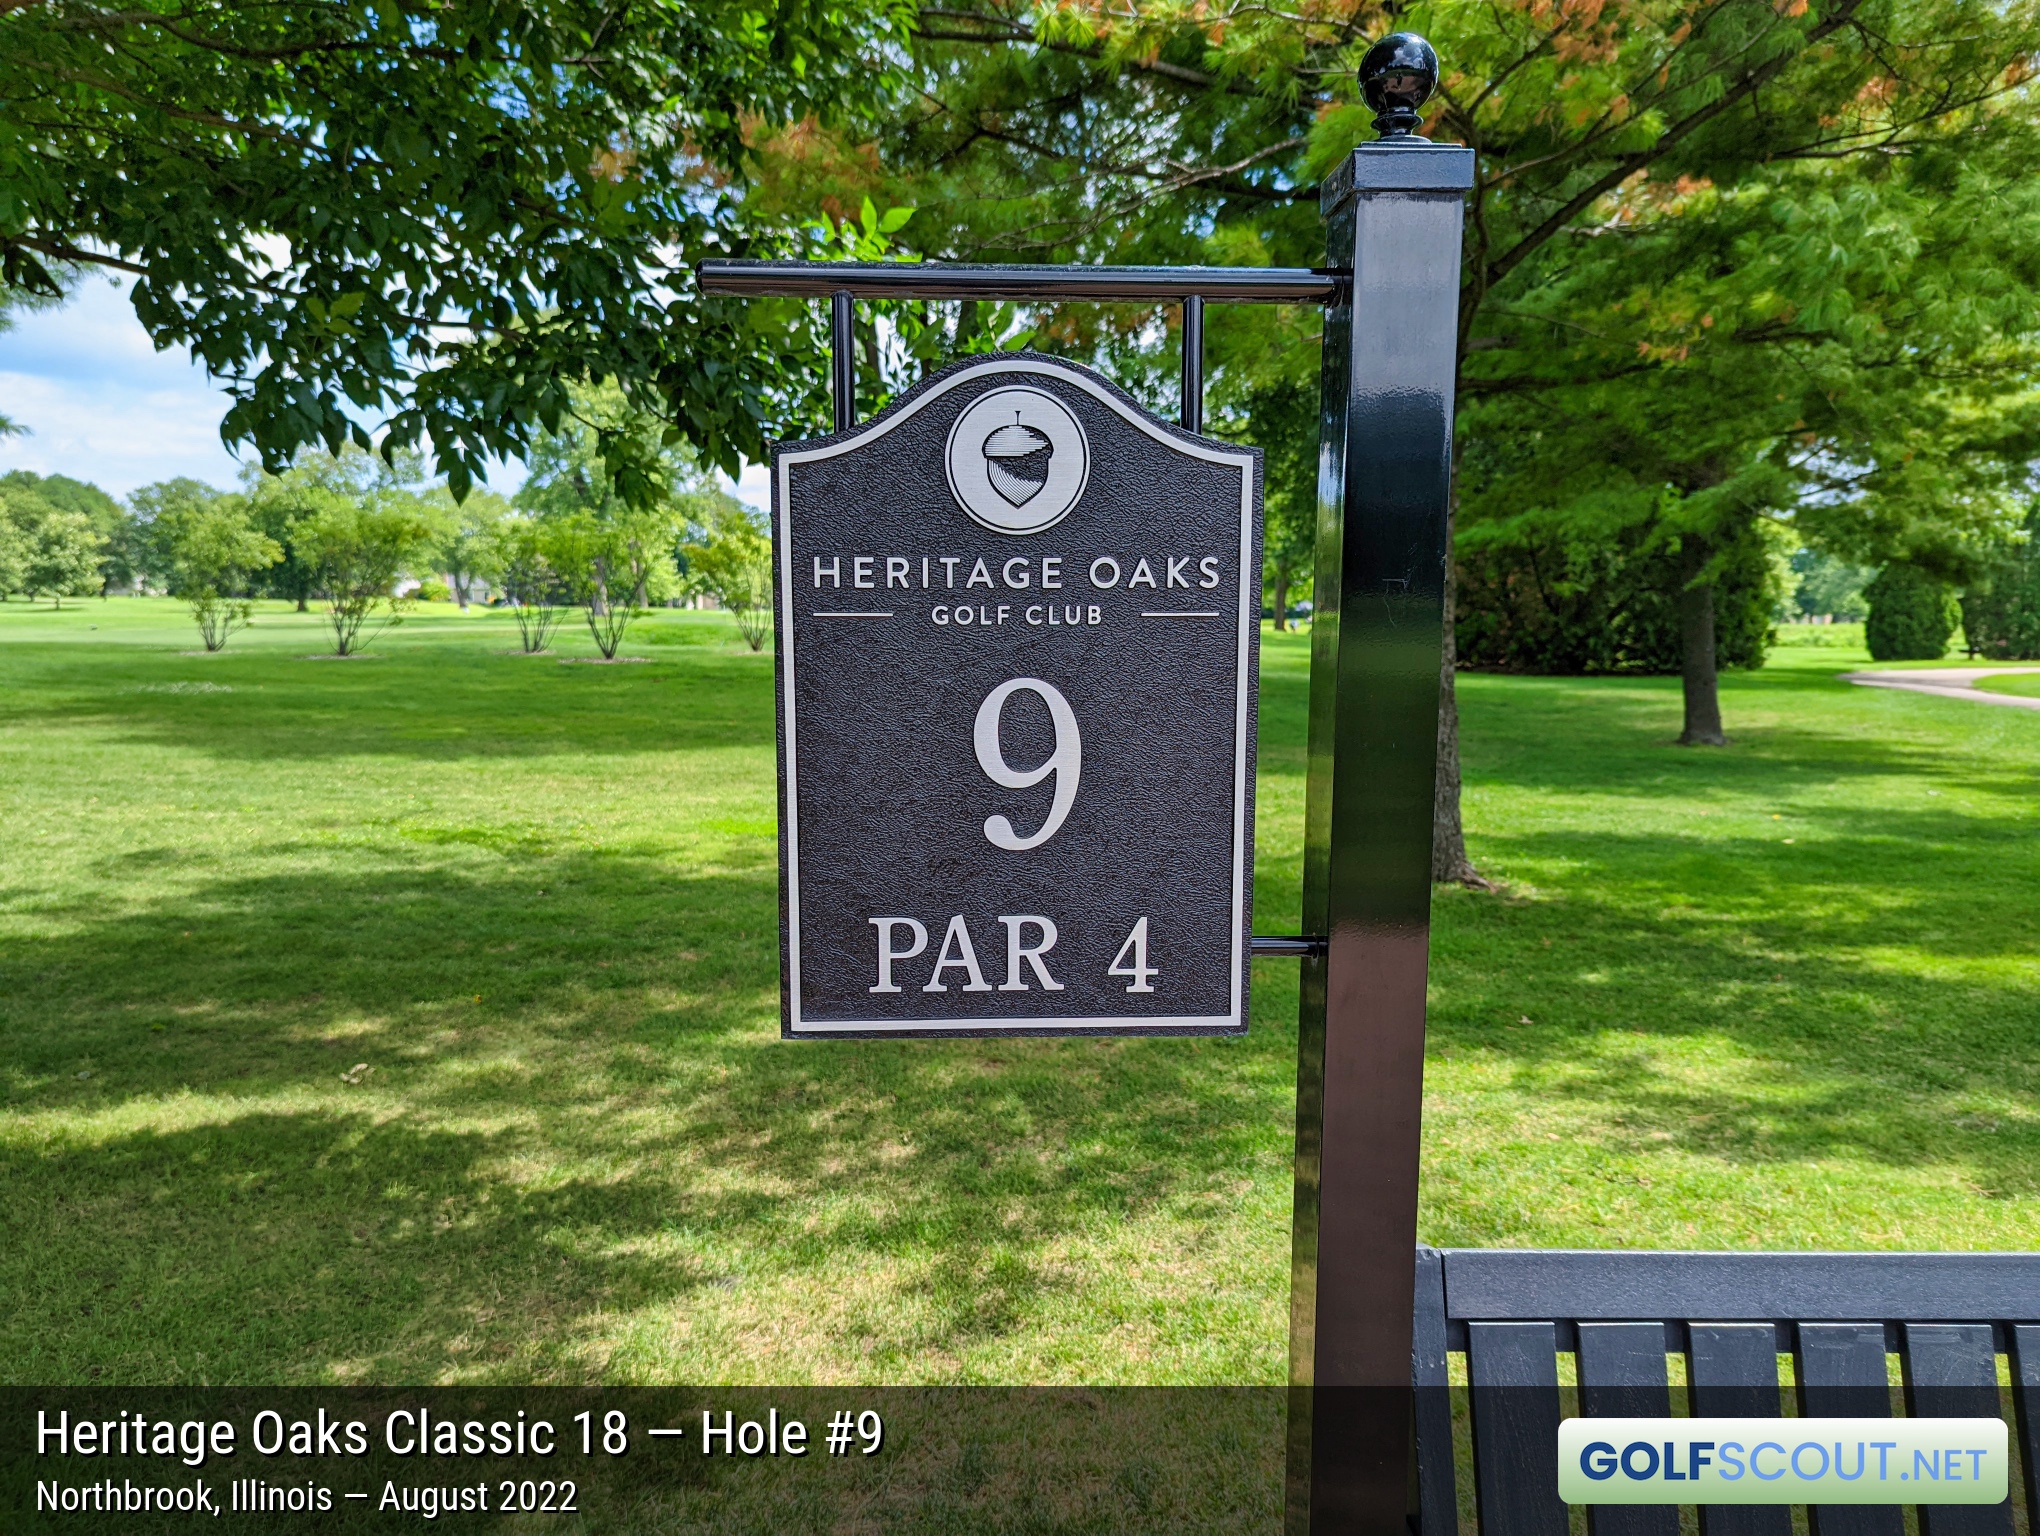 Photo of hole #9 at Heritage Oaks Golf Club - Classic 18 in Northbrook, Illinois. 